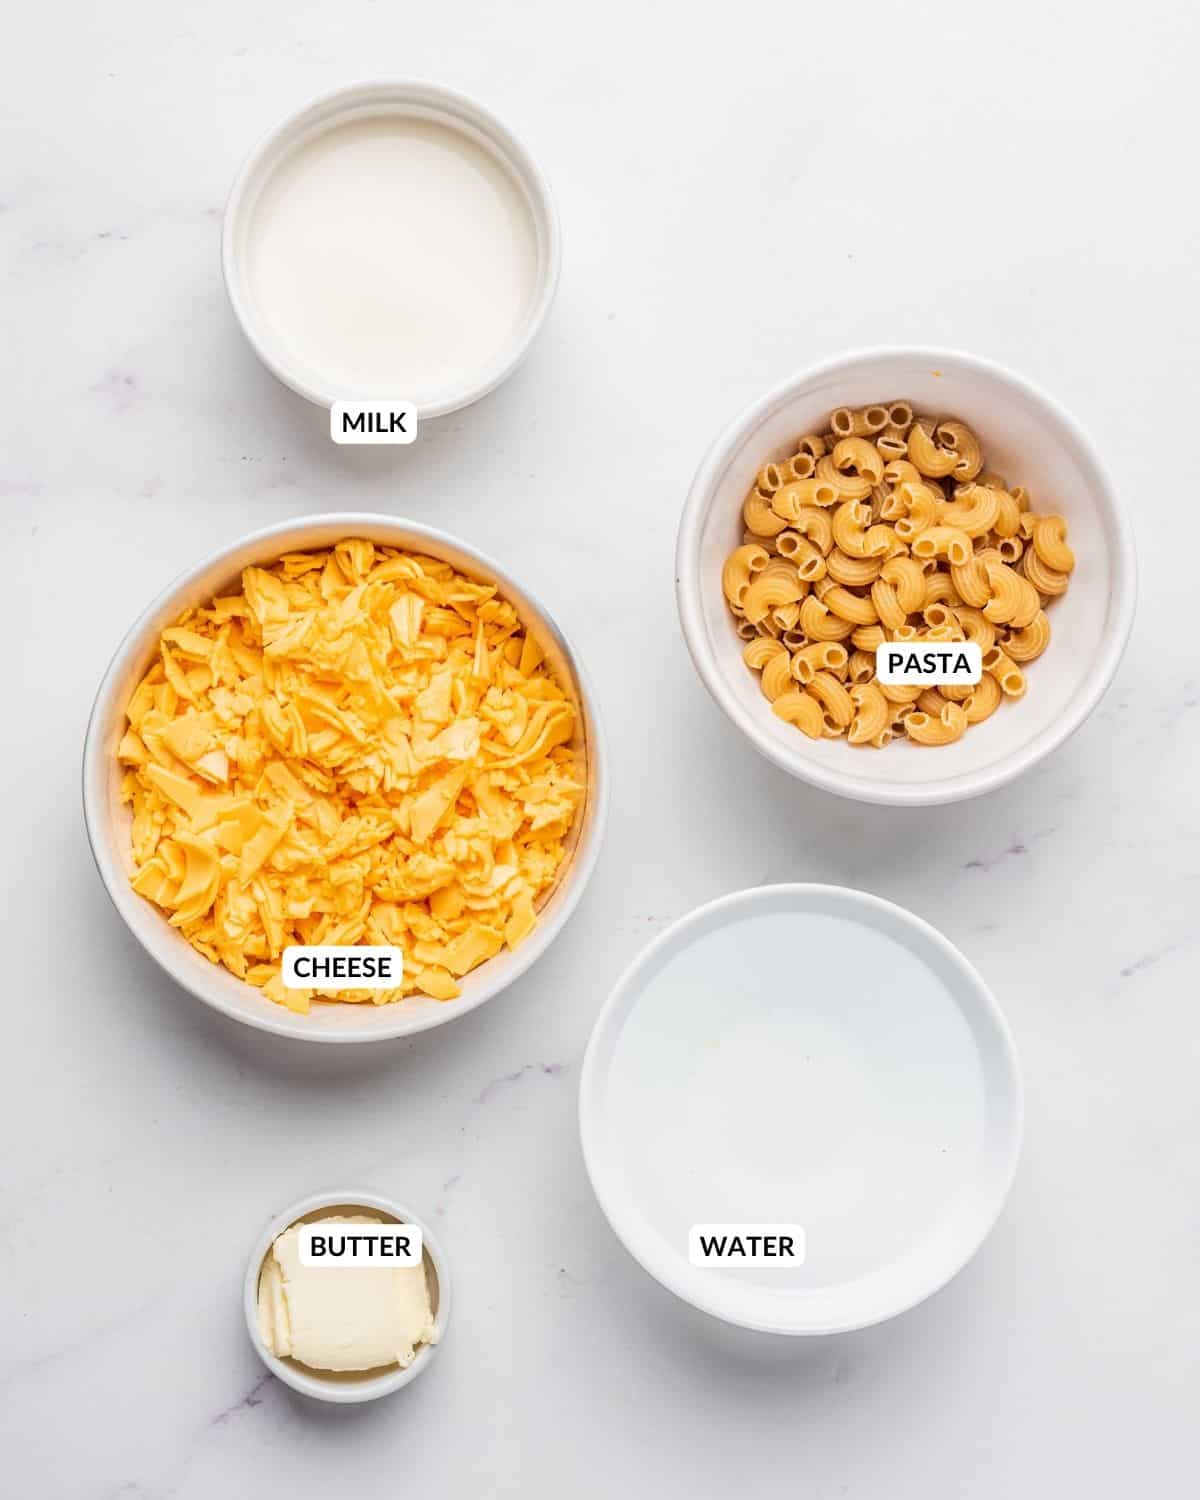 An image of the ingredients of microwave mac and cheese in separate bowls with labels.